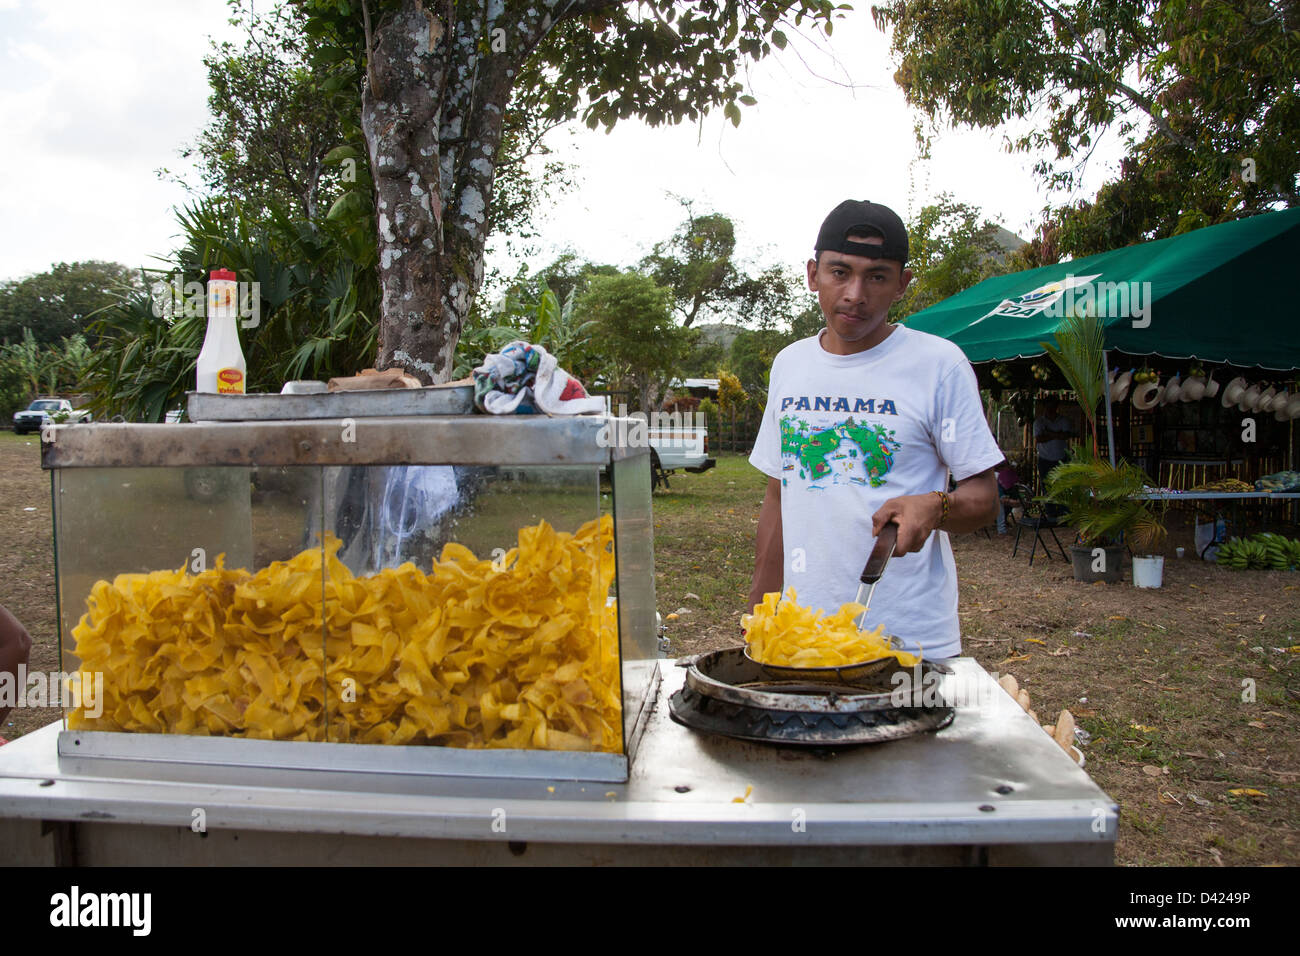 Vendor selling fried plantain chips at a folklore festival. Stock Photo